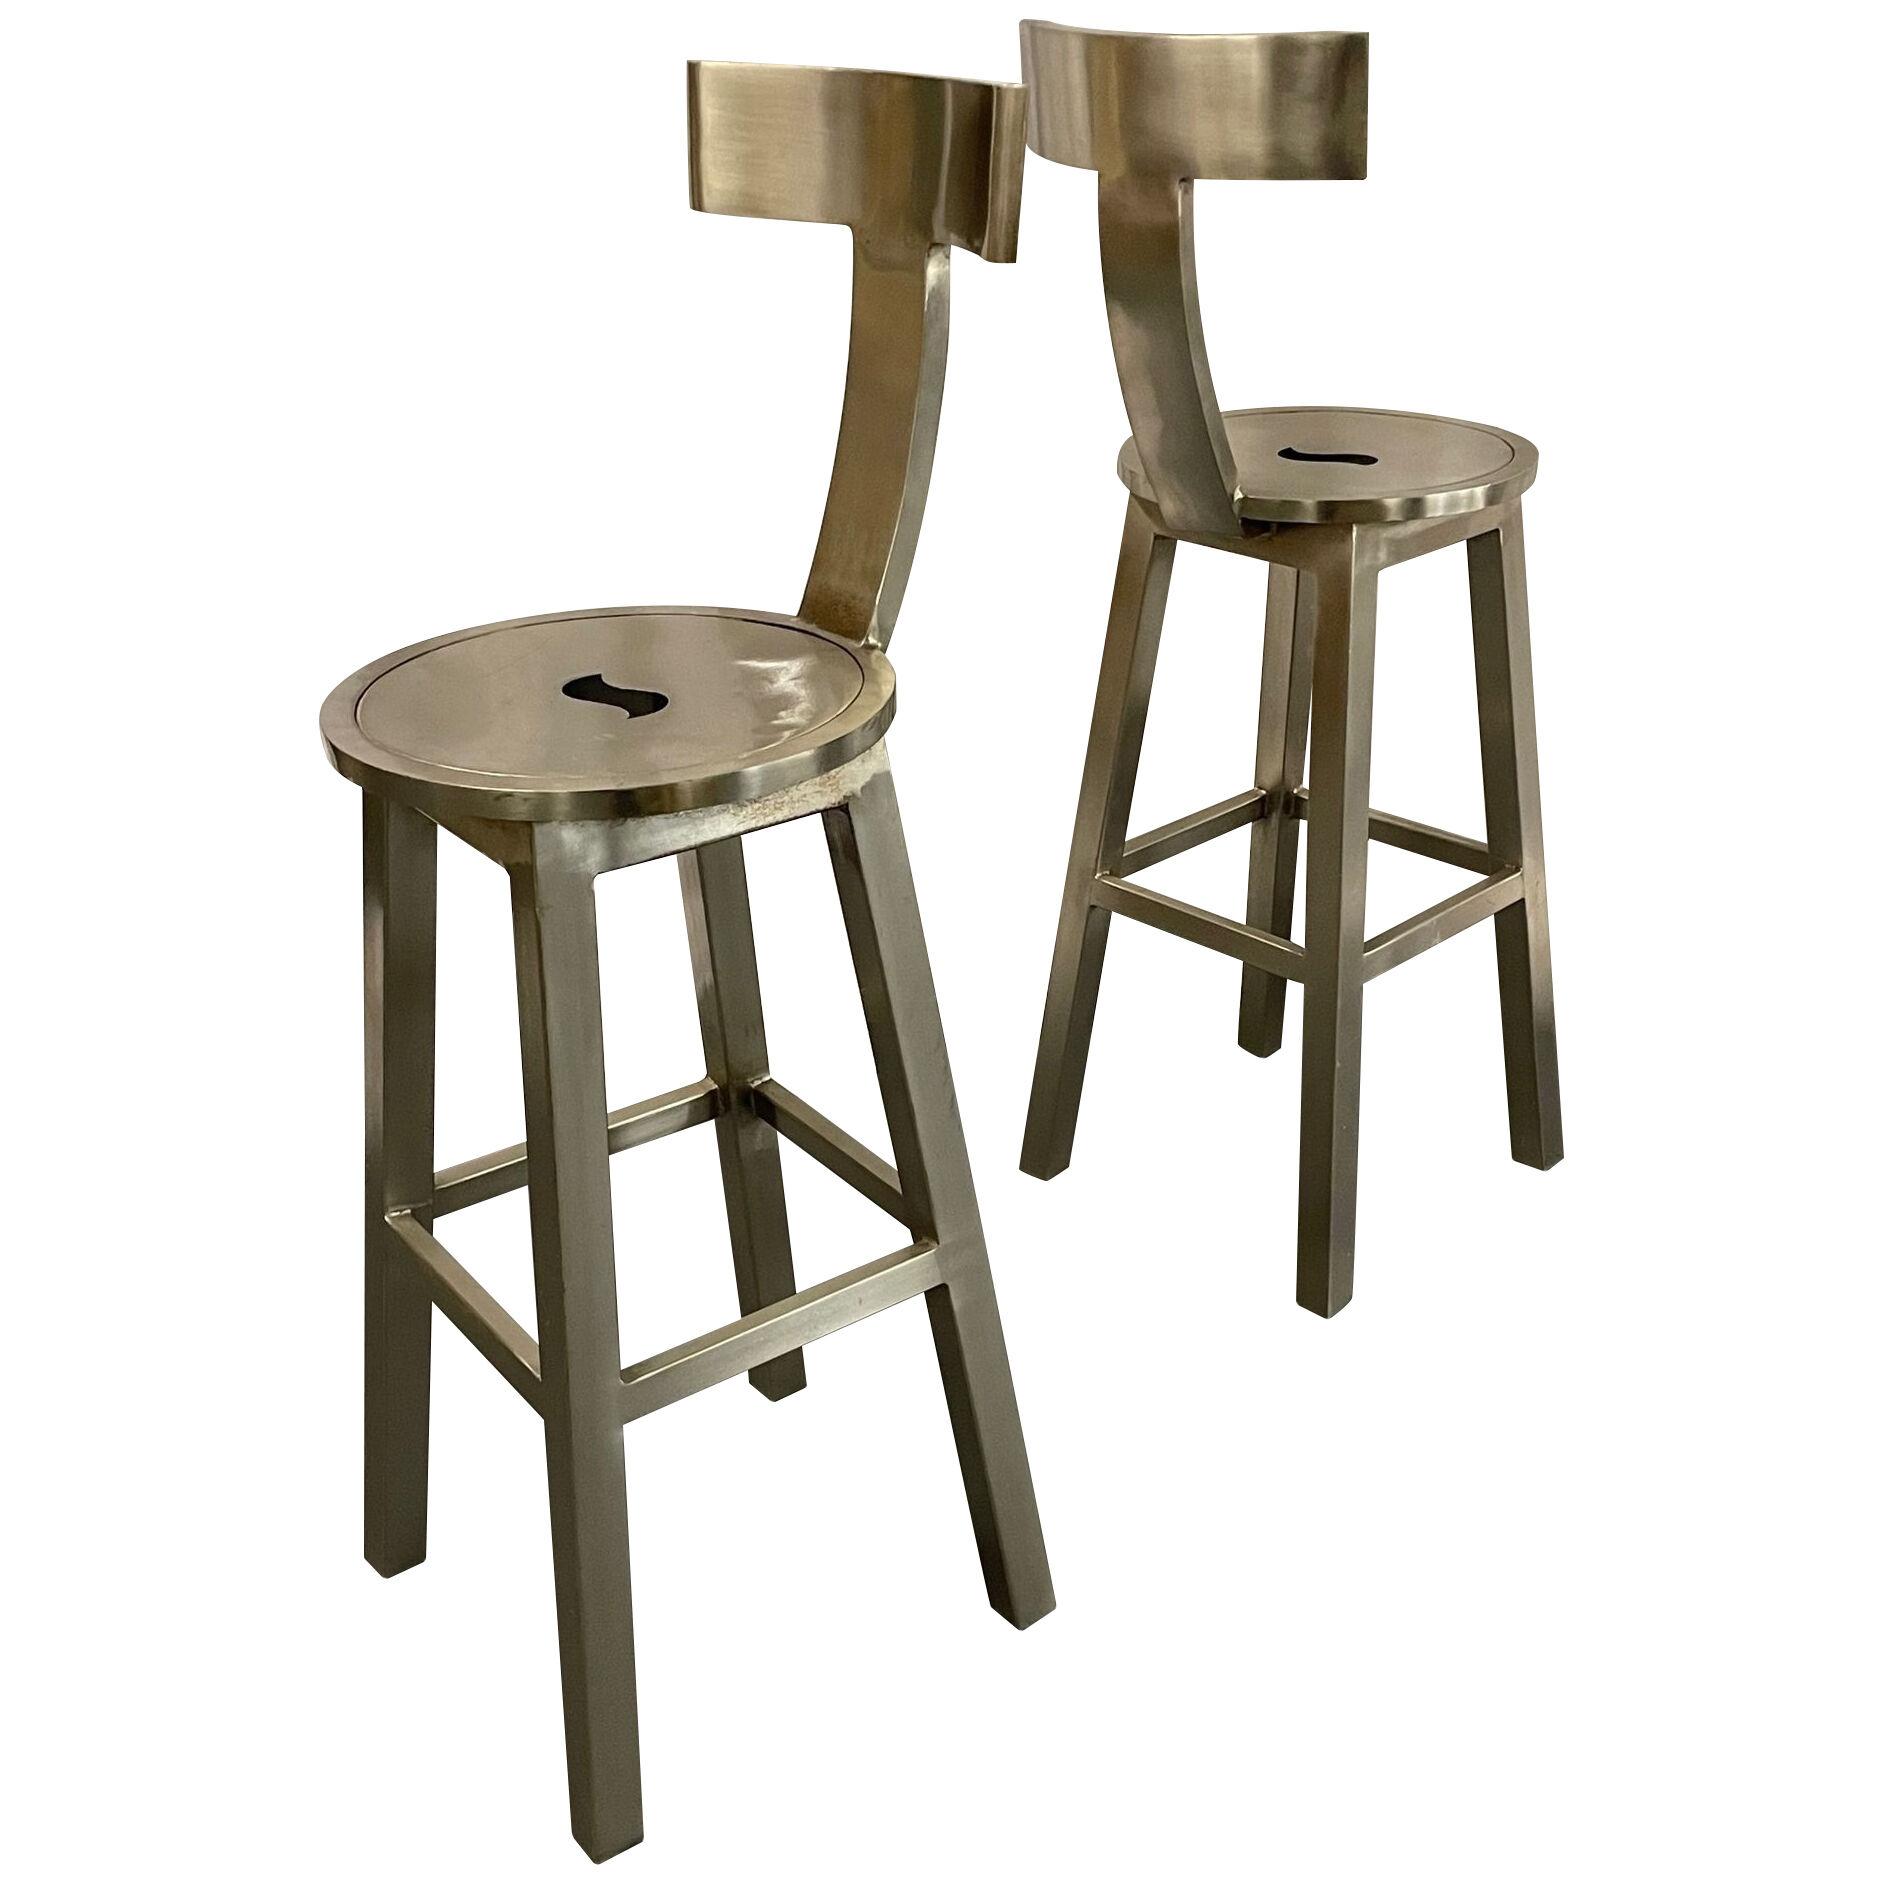 Pair of Modern Industrial Style Steel Bar / Counter Stools, Organic Form